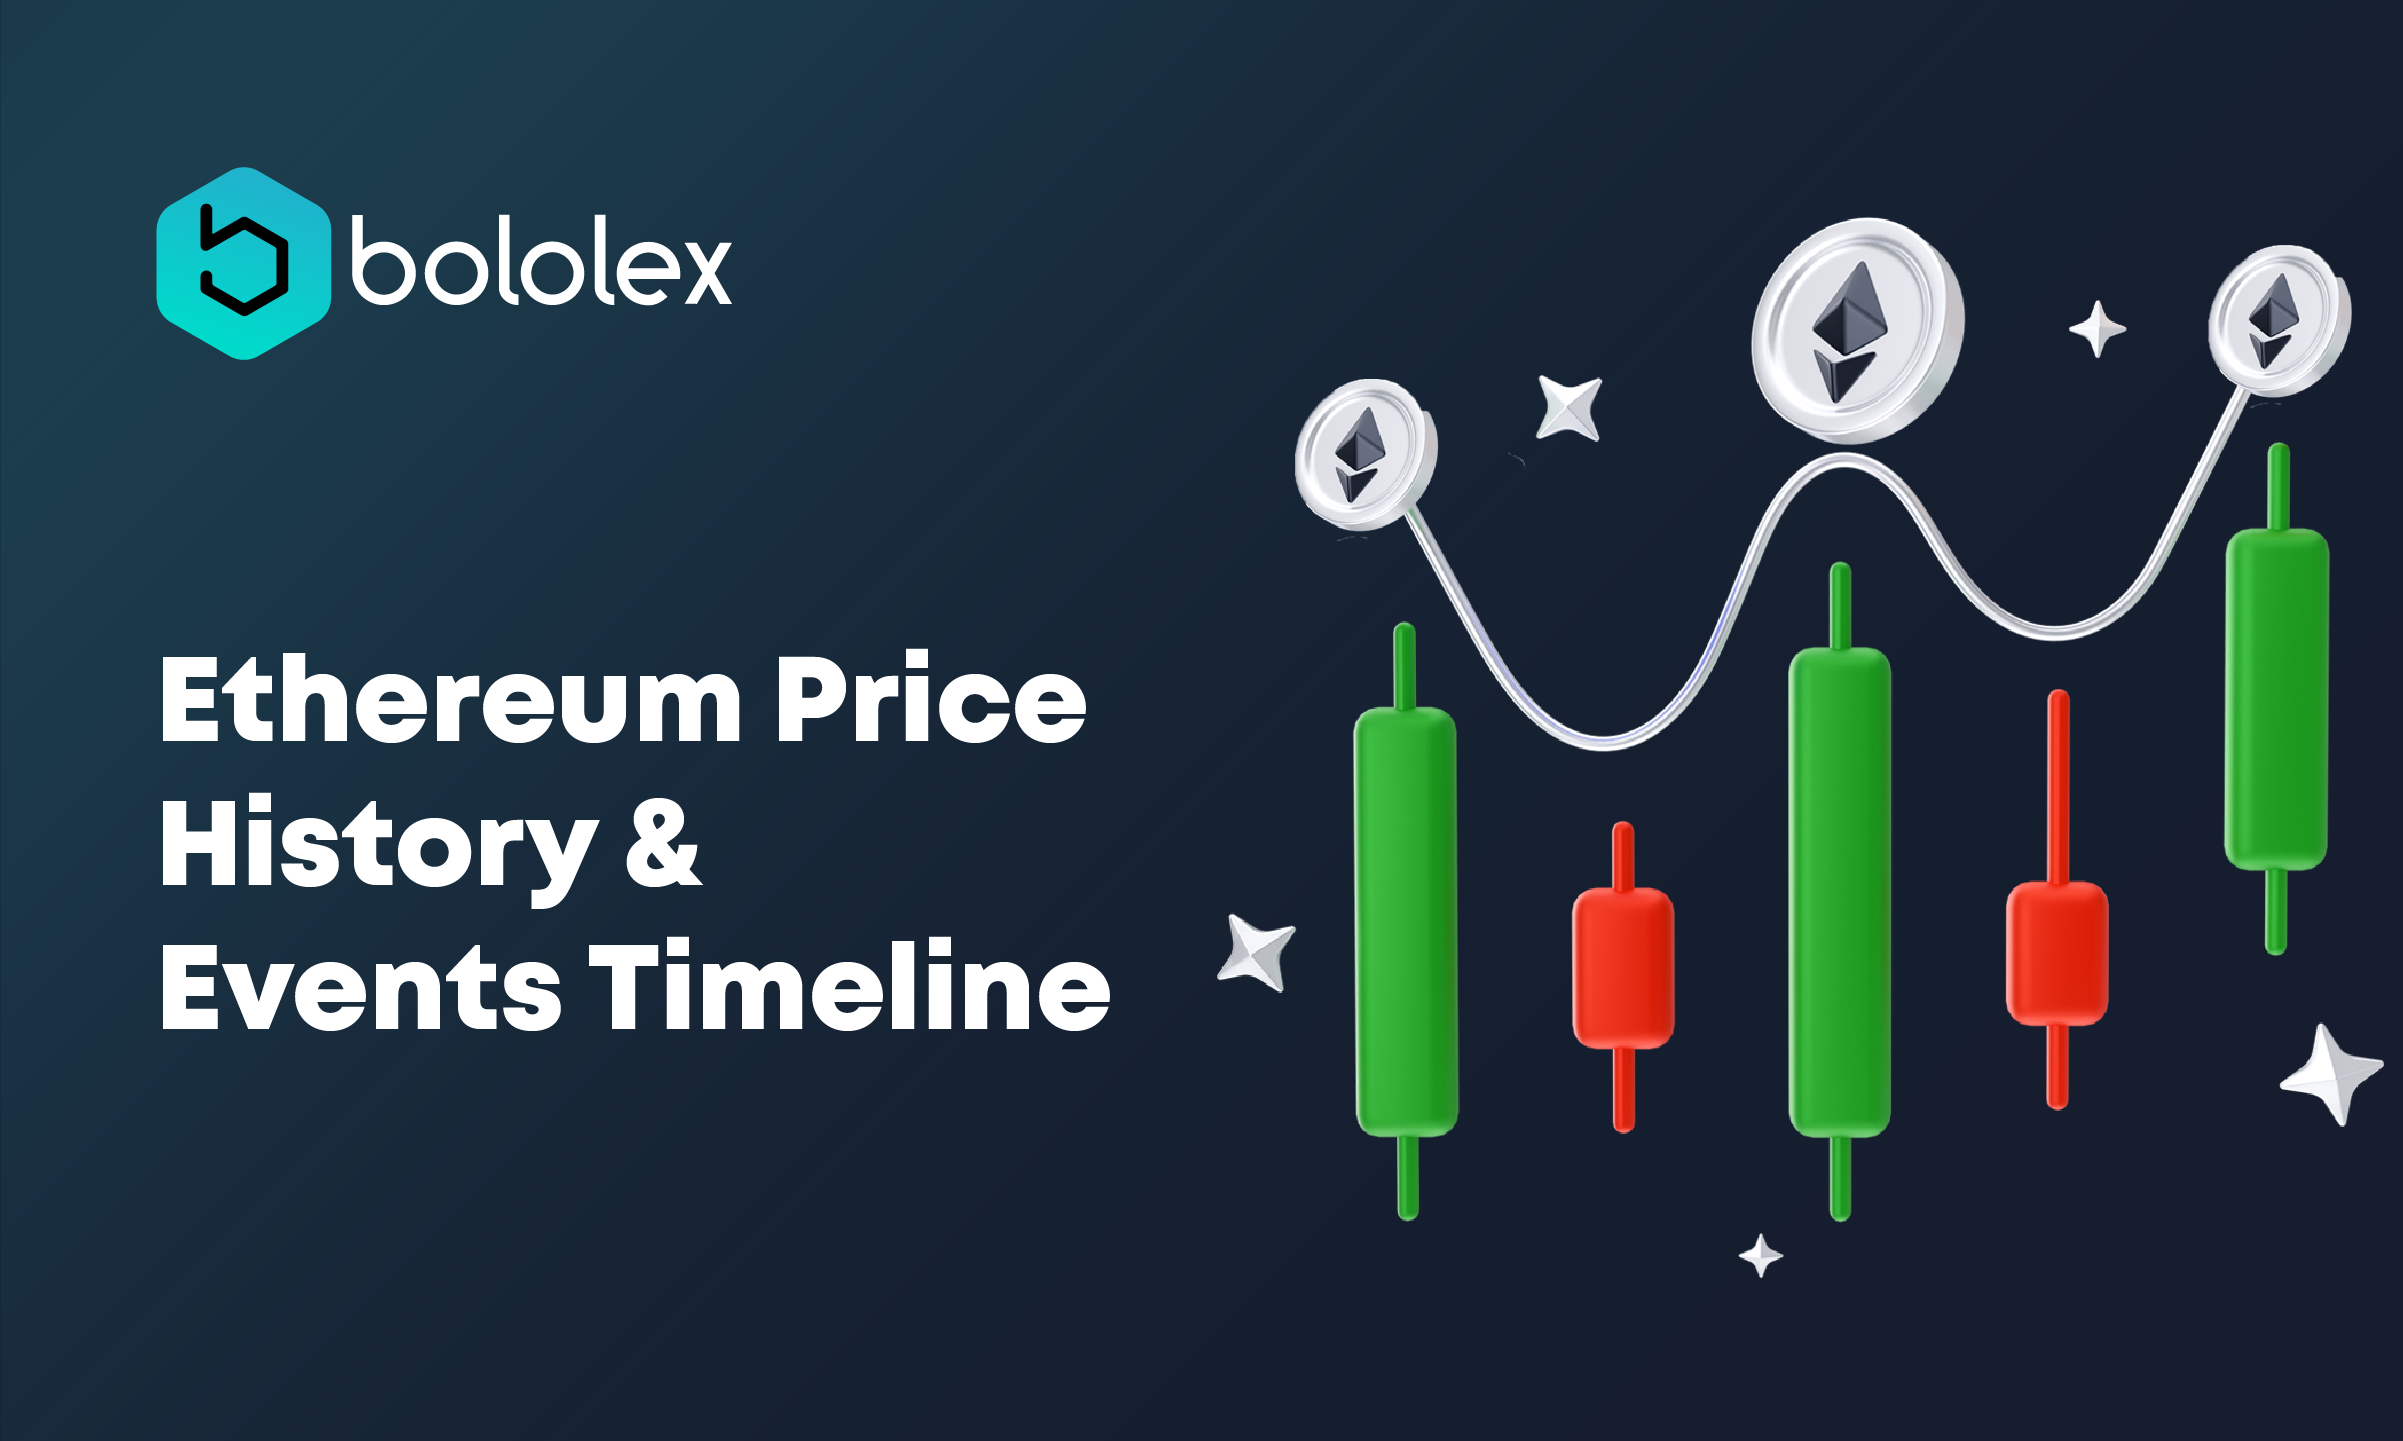   🌐A look back in time  ✔️Ethereum Price History & Events Timeline 